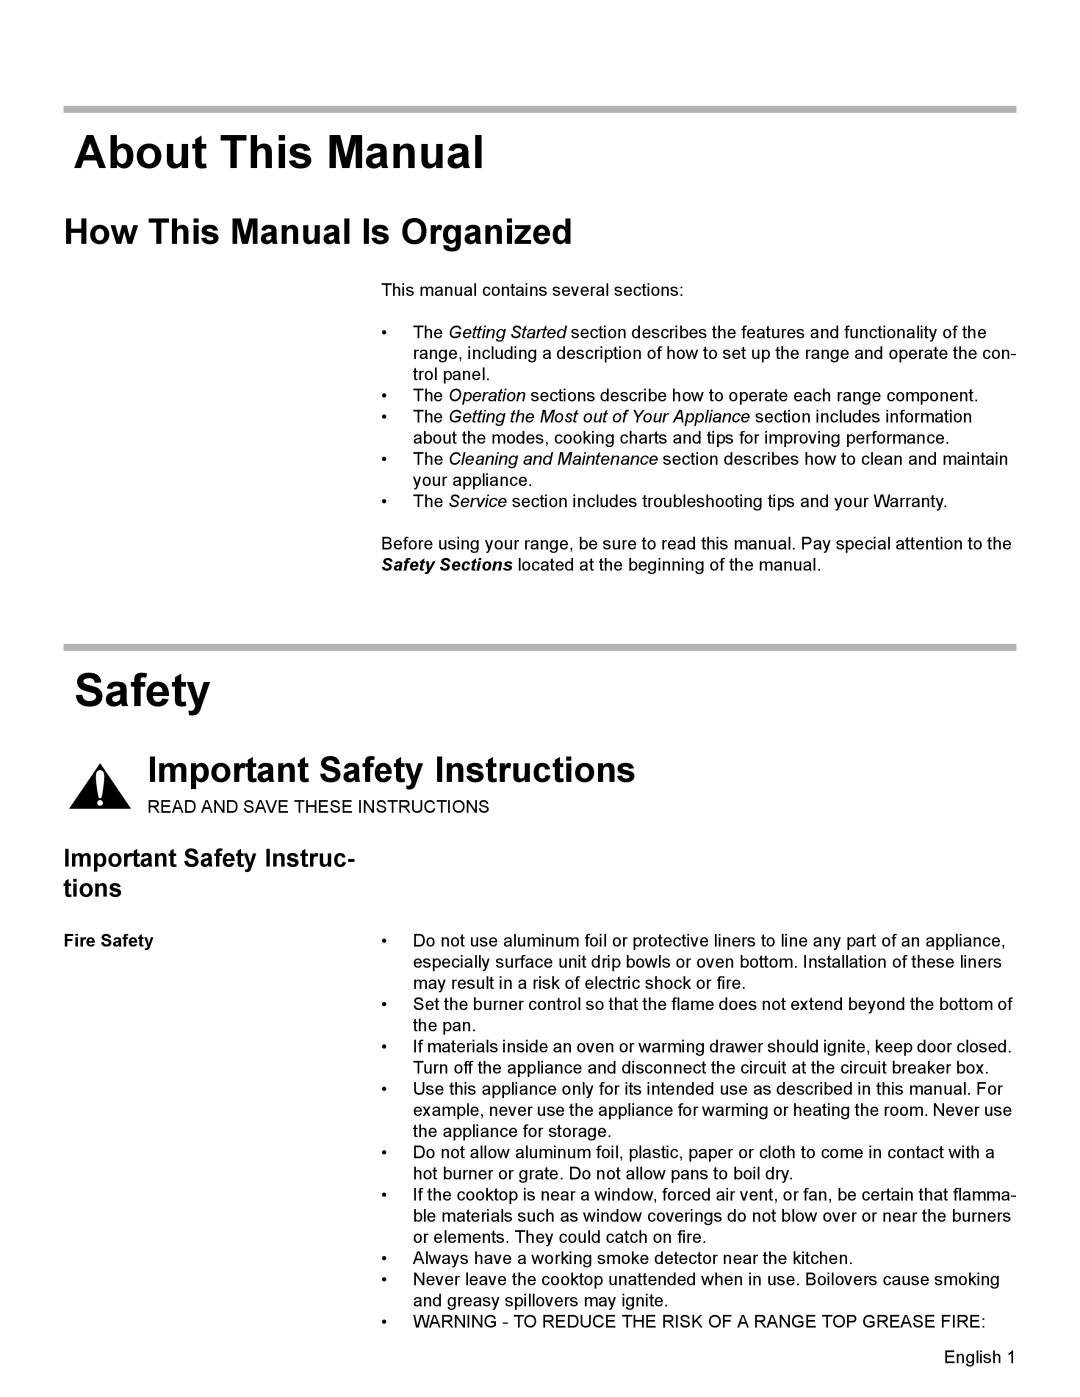 Bosch Appliances HGS7052UC About This Manual, How This Manual Is Organized, Important Safety Instructions, Fire Safety 